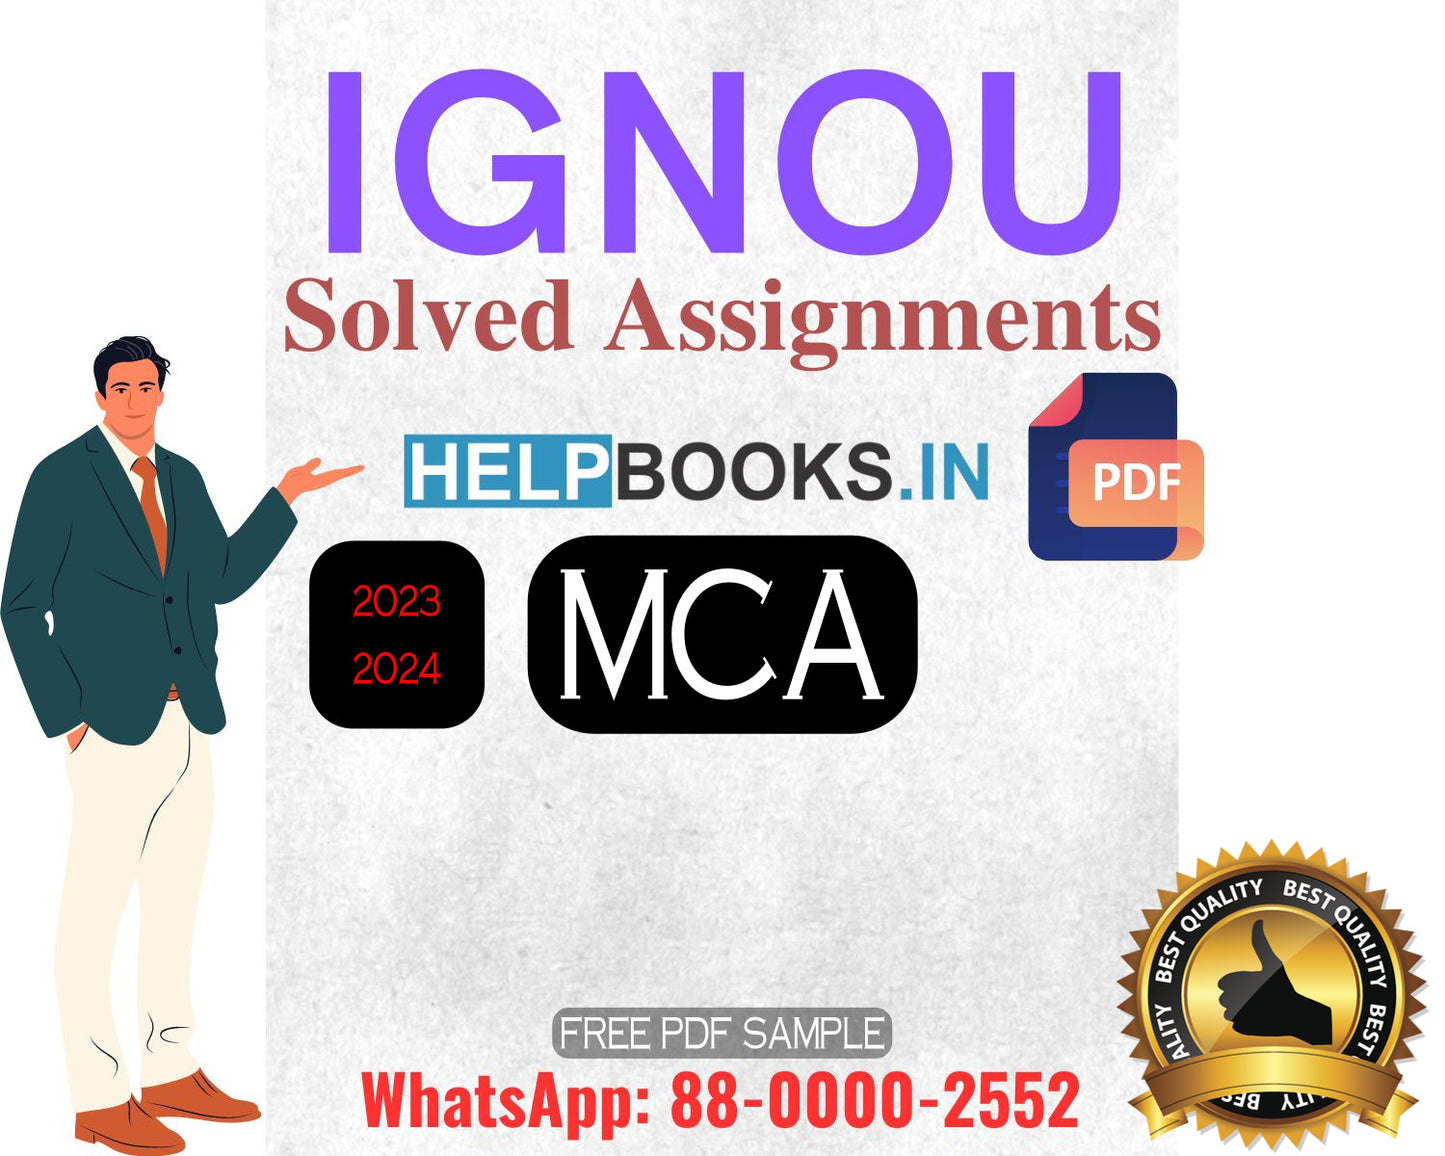 IGNOU Master's Degree Programme Latest IGNOU Solved Assignment 2023-24 : Master of Computer Applications MCA_NEW Solved Assignments